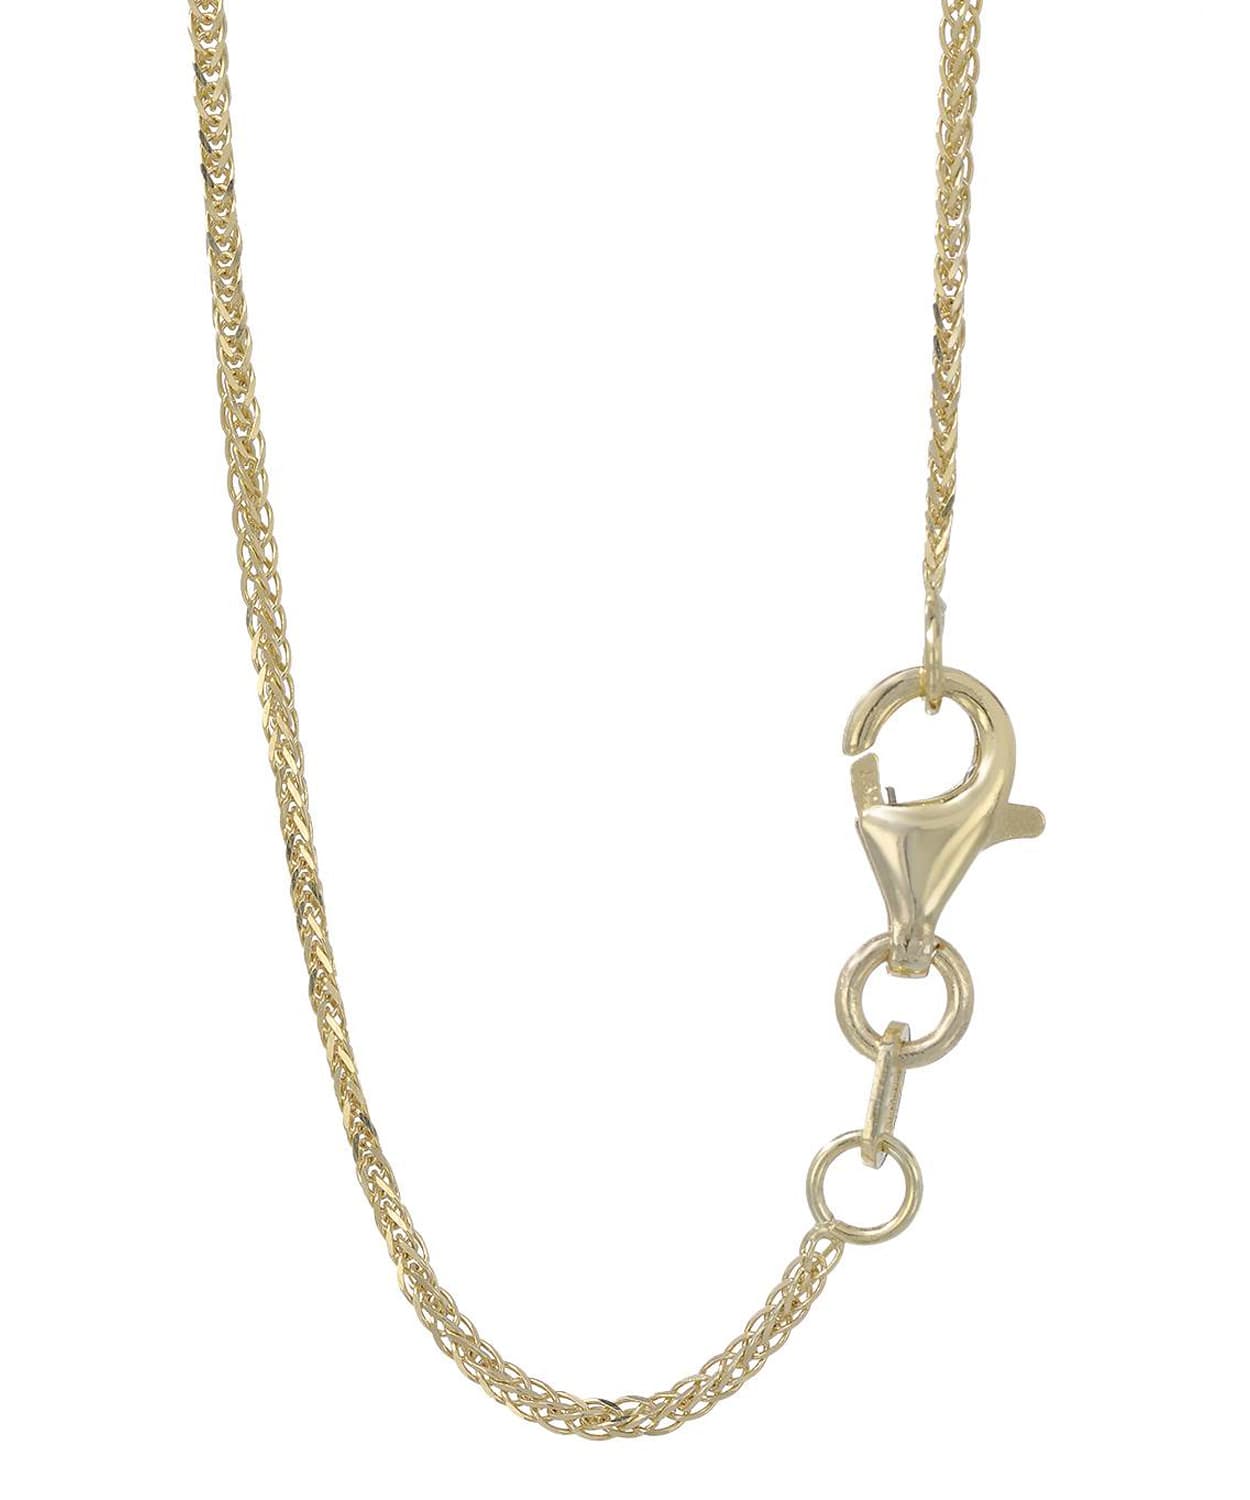 0.8mm 14k Yellow Gold Dainty Square Wheat Chain View 2